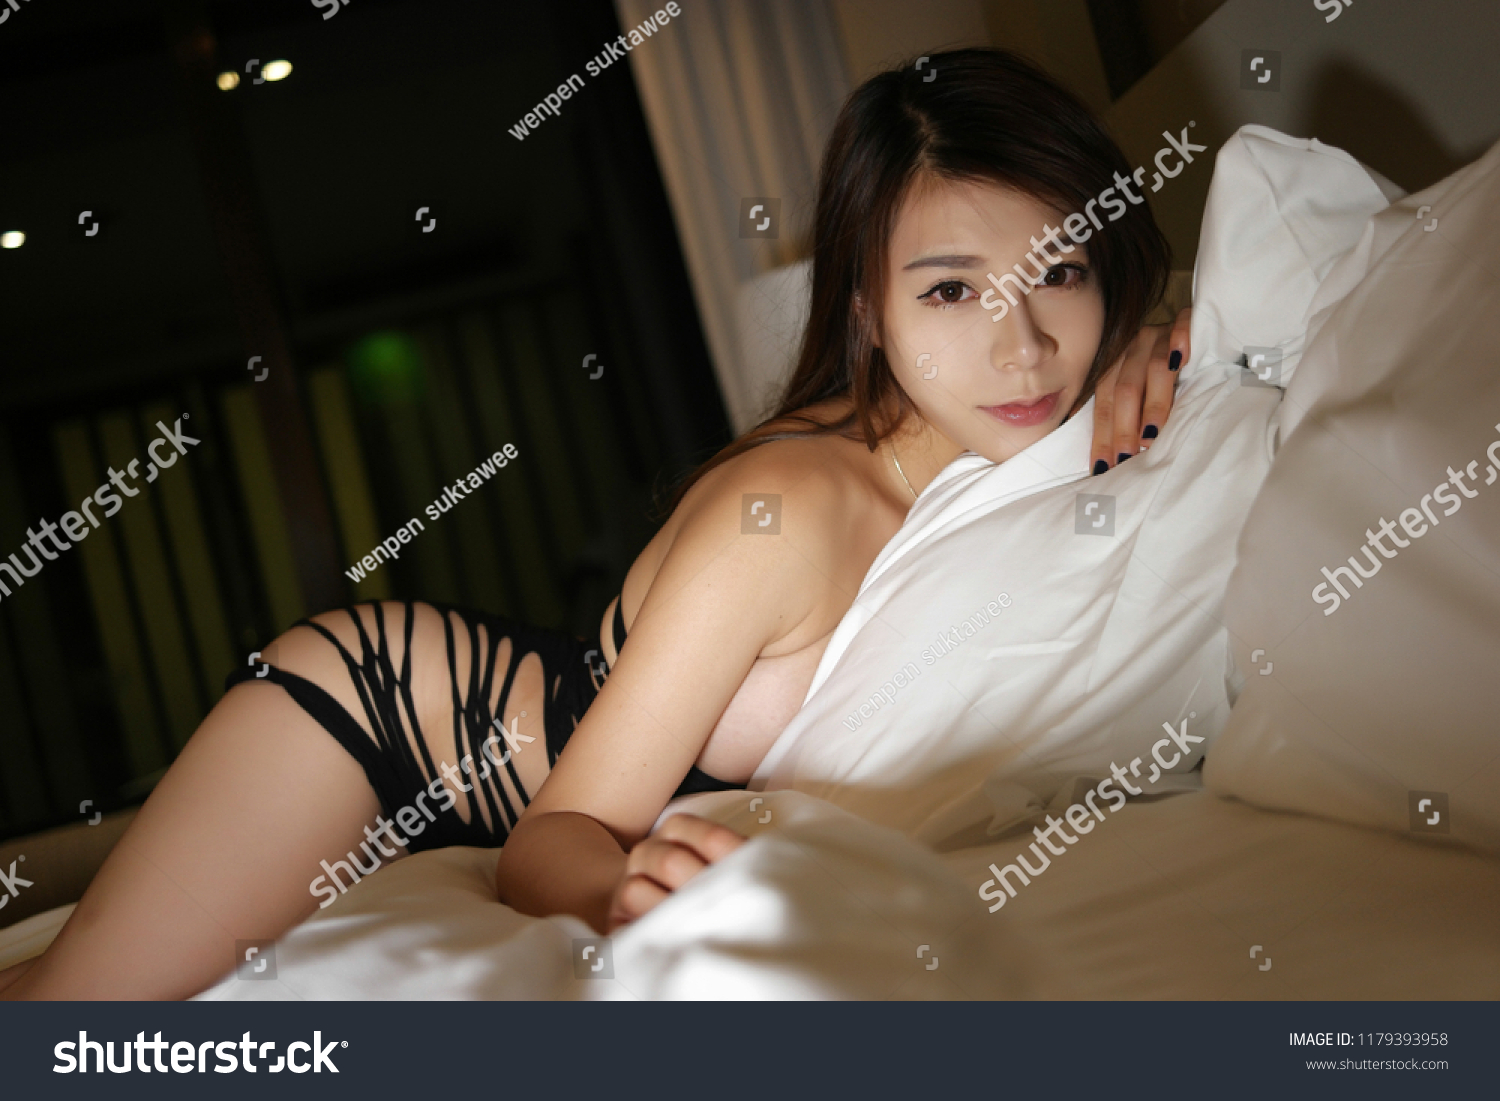 Hottest Asian Girls Nude